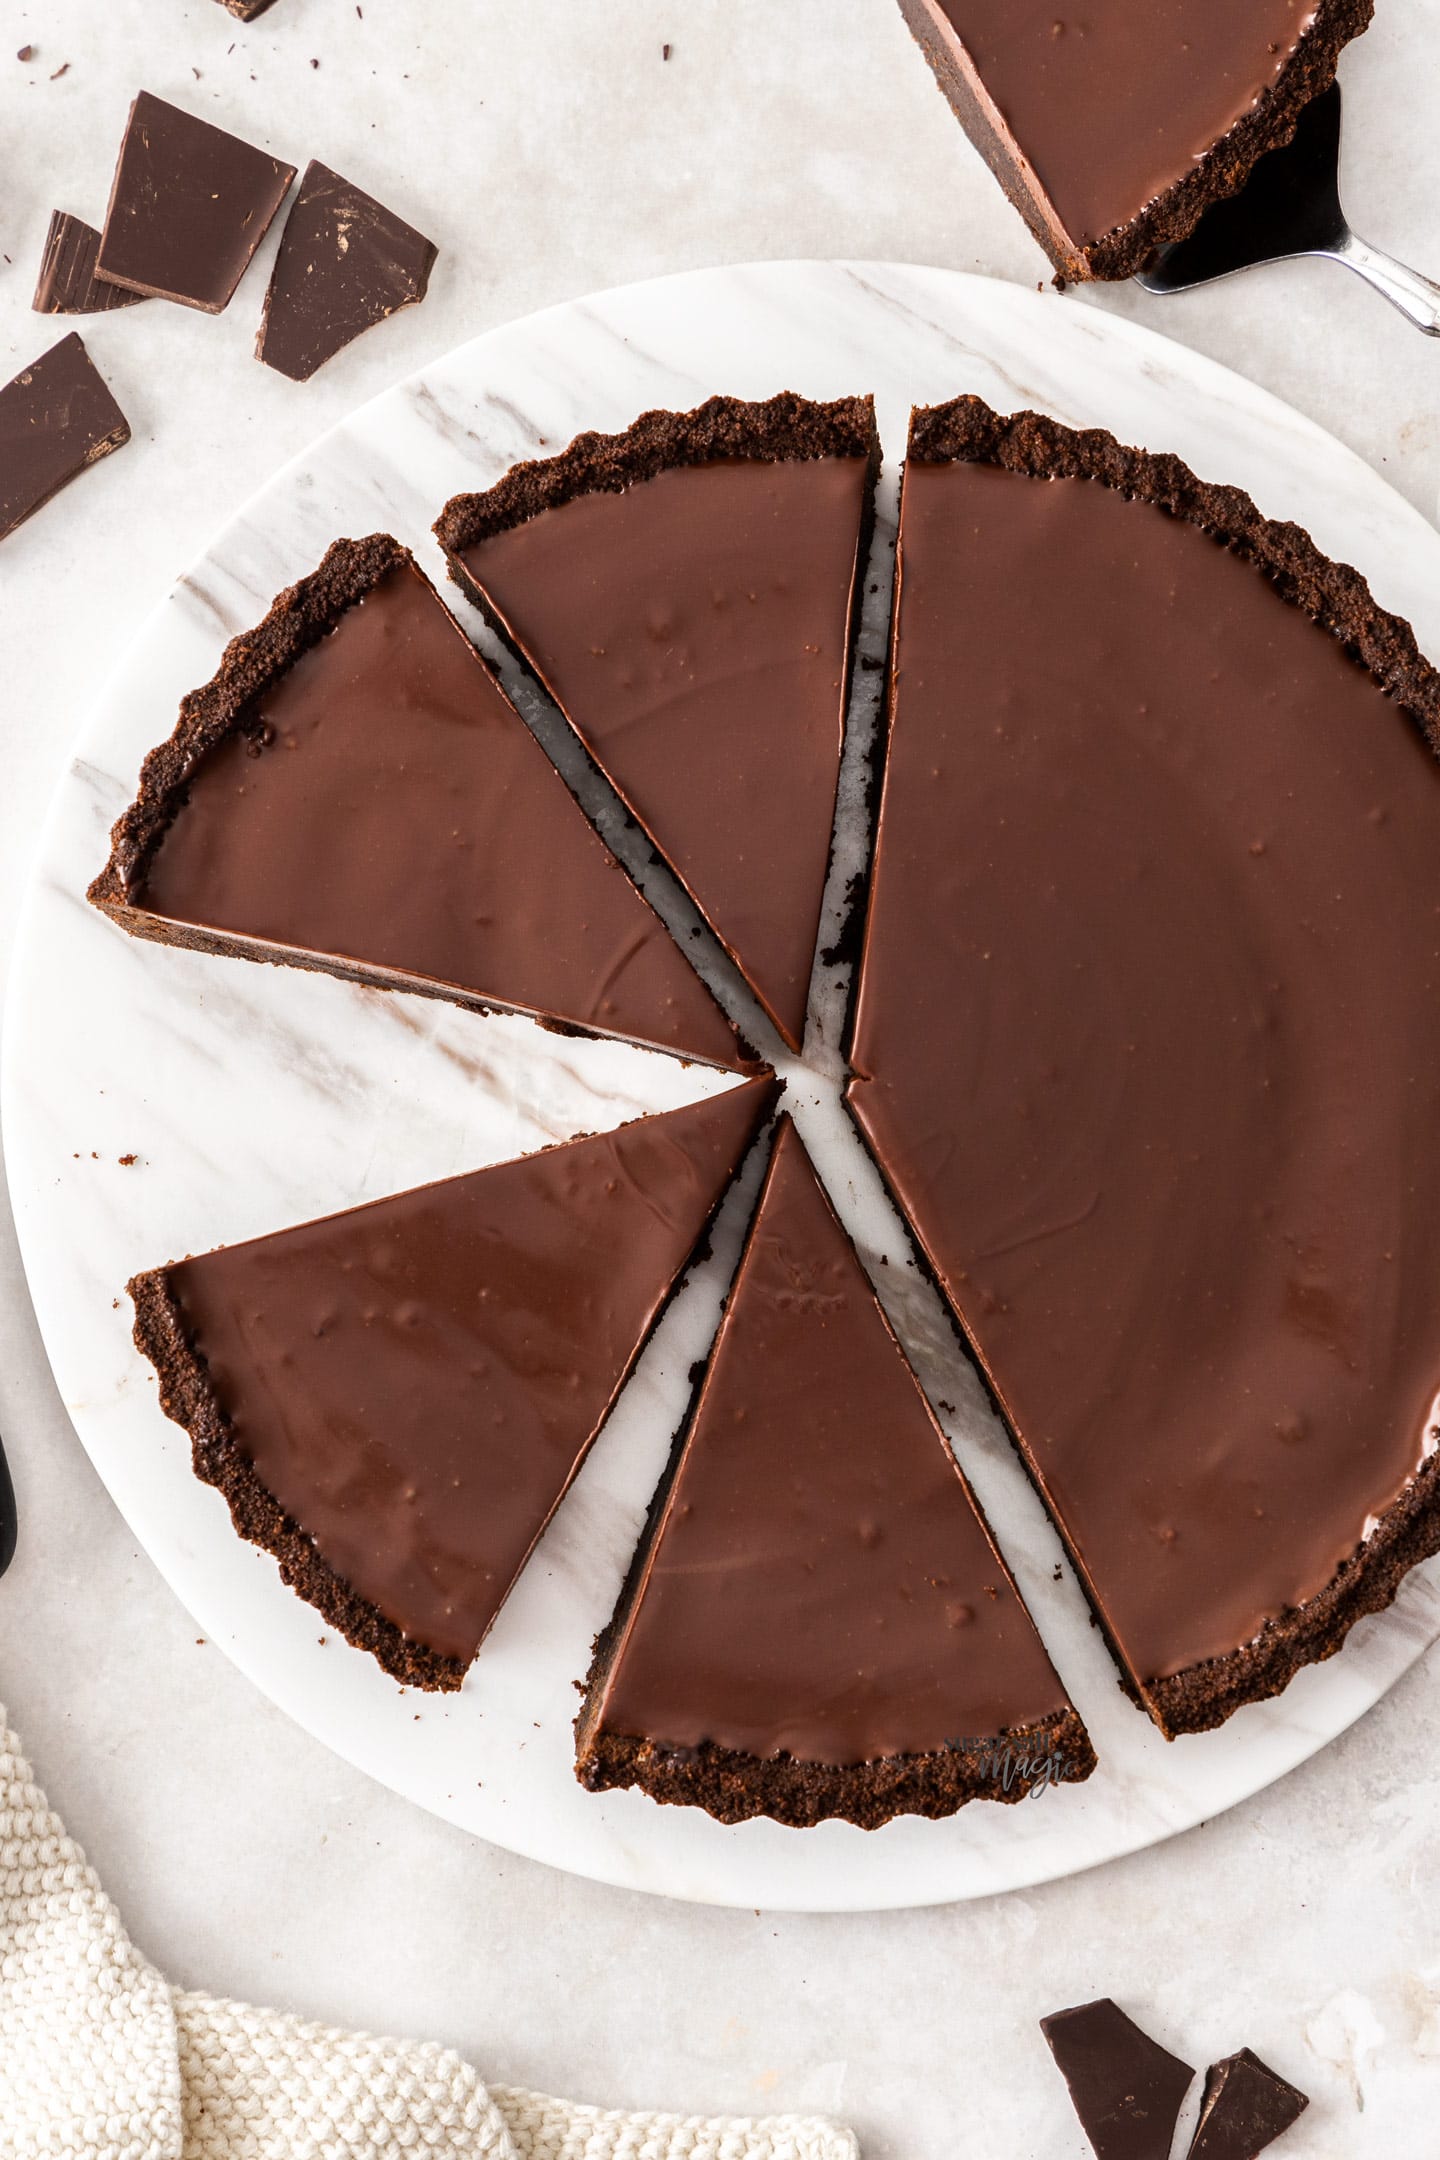 Top down view of a brownie tart cut into slices.